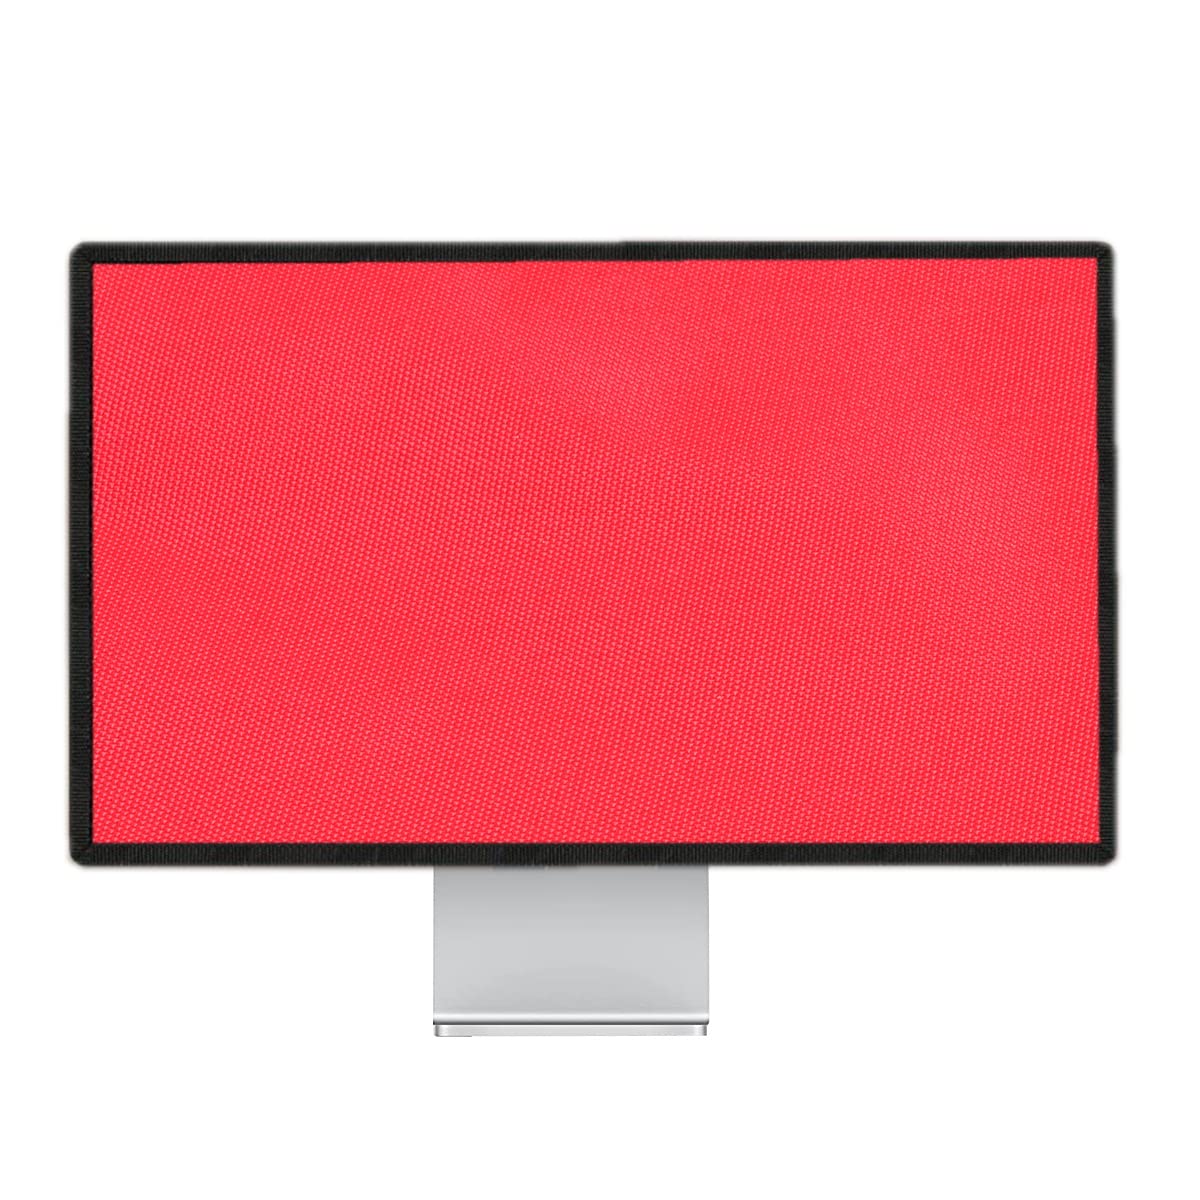 PalaP Super Premium Dust Proof Monitor Cover for DELL All in ONE Desktop 27 inches (RED)